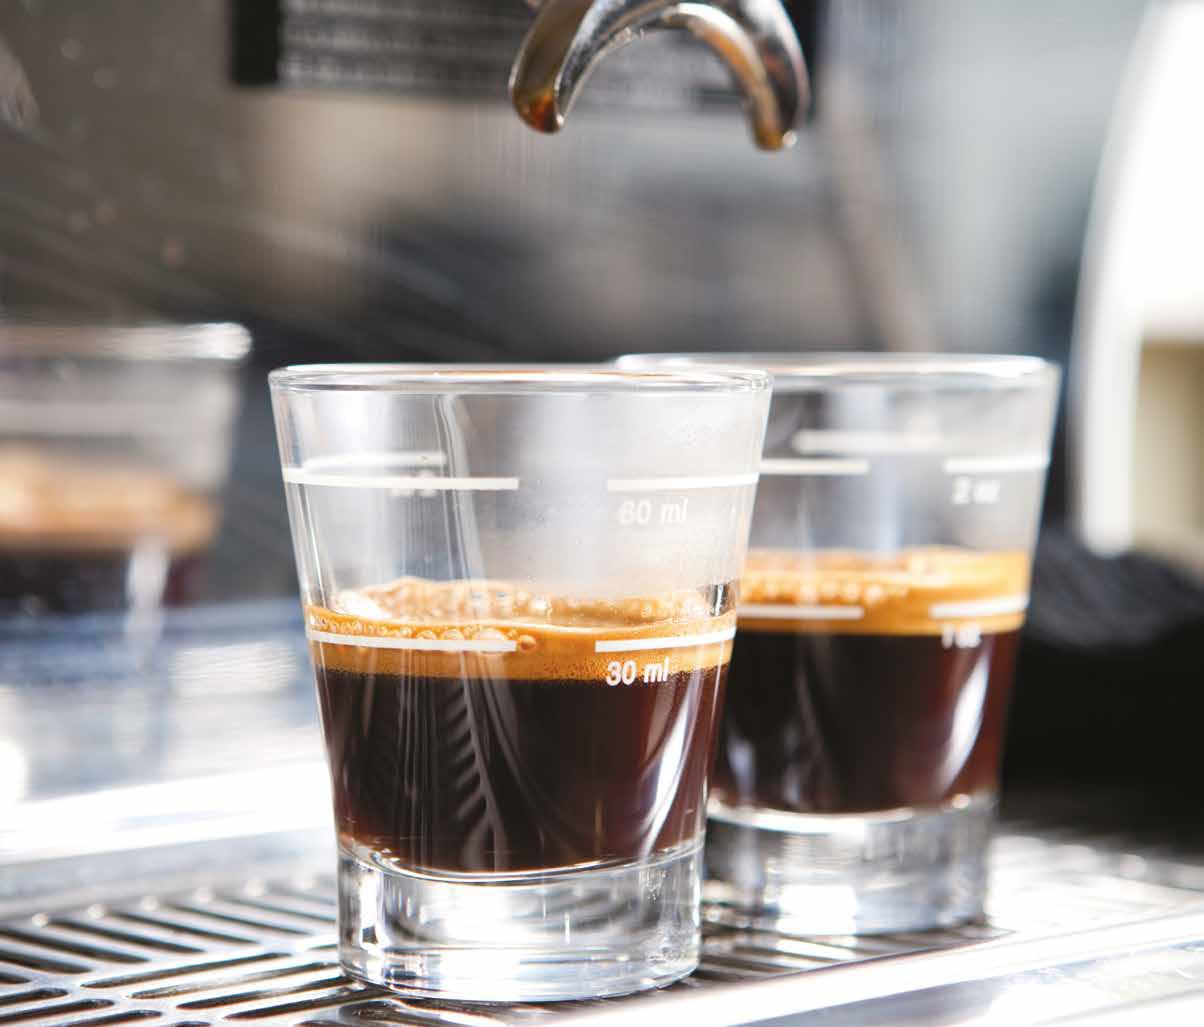 How to brew espresso in the correct way?